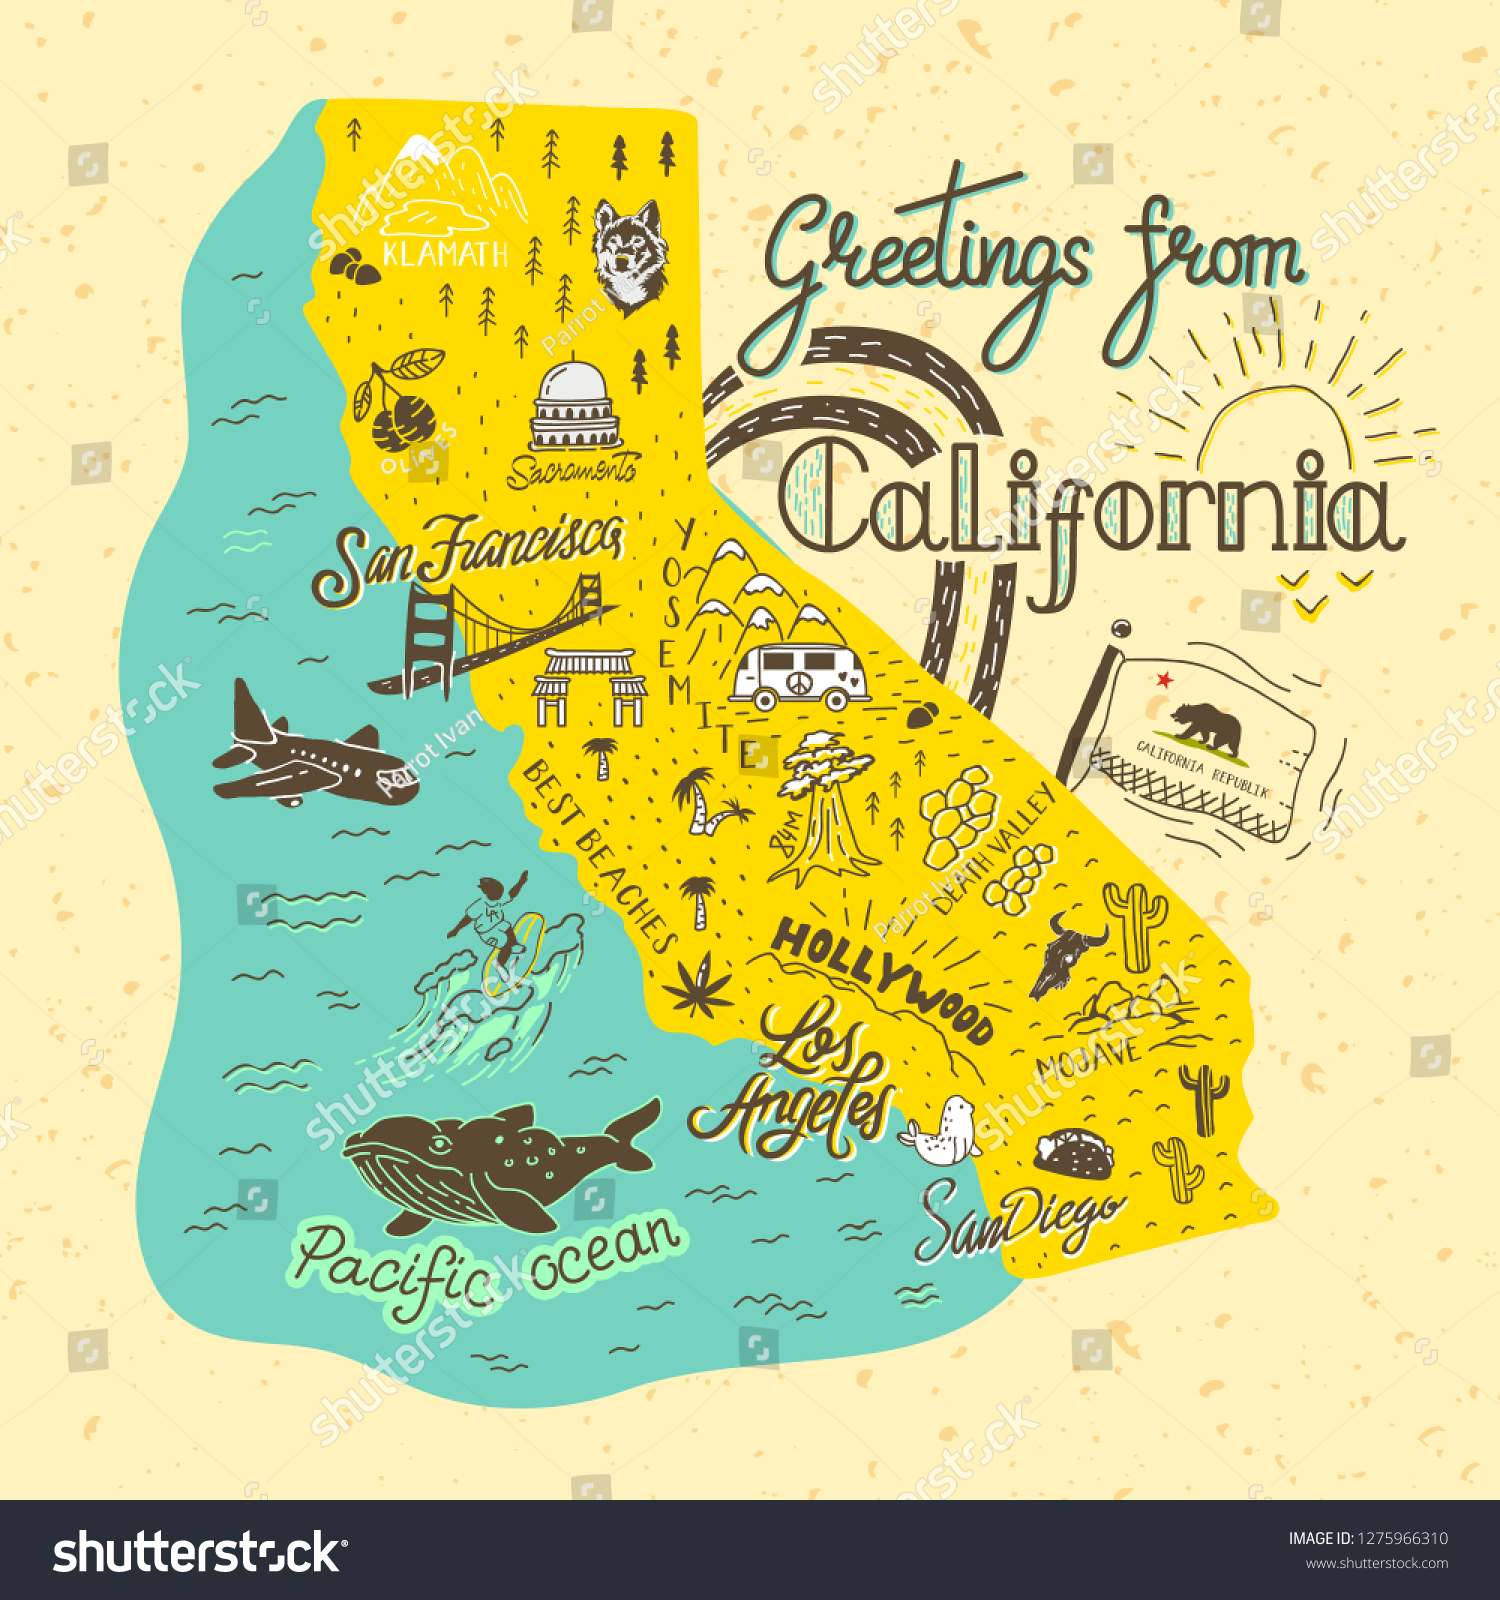 California Illustrator Vector Map With Cities Roads And Images